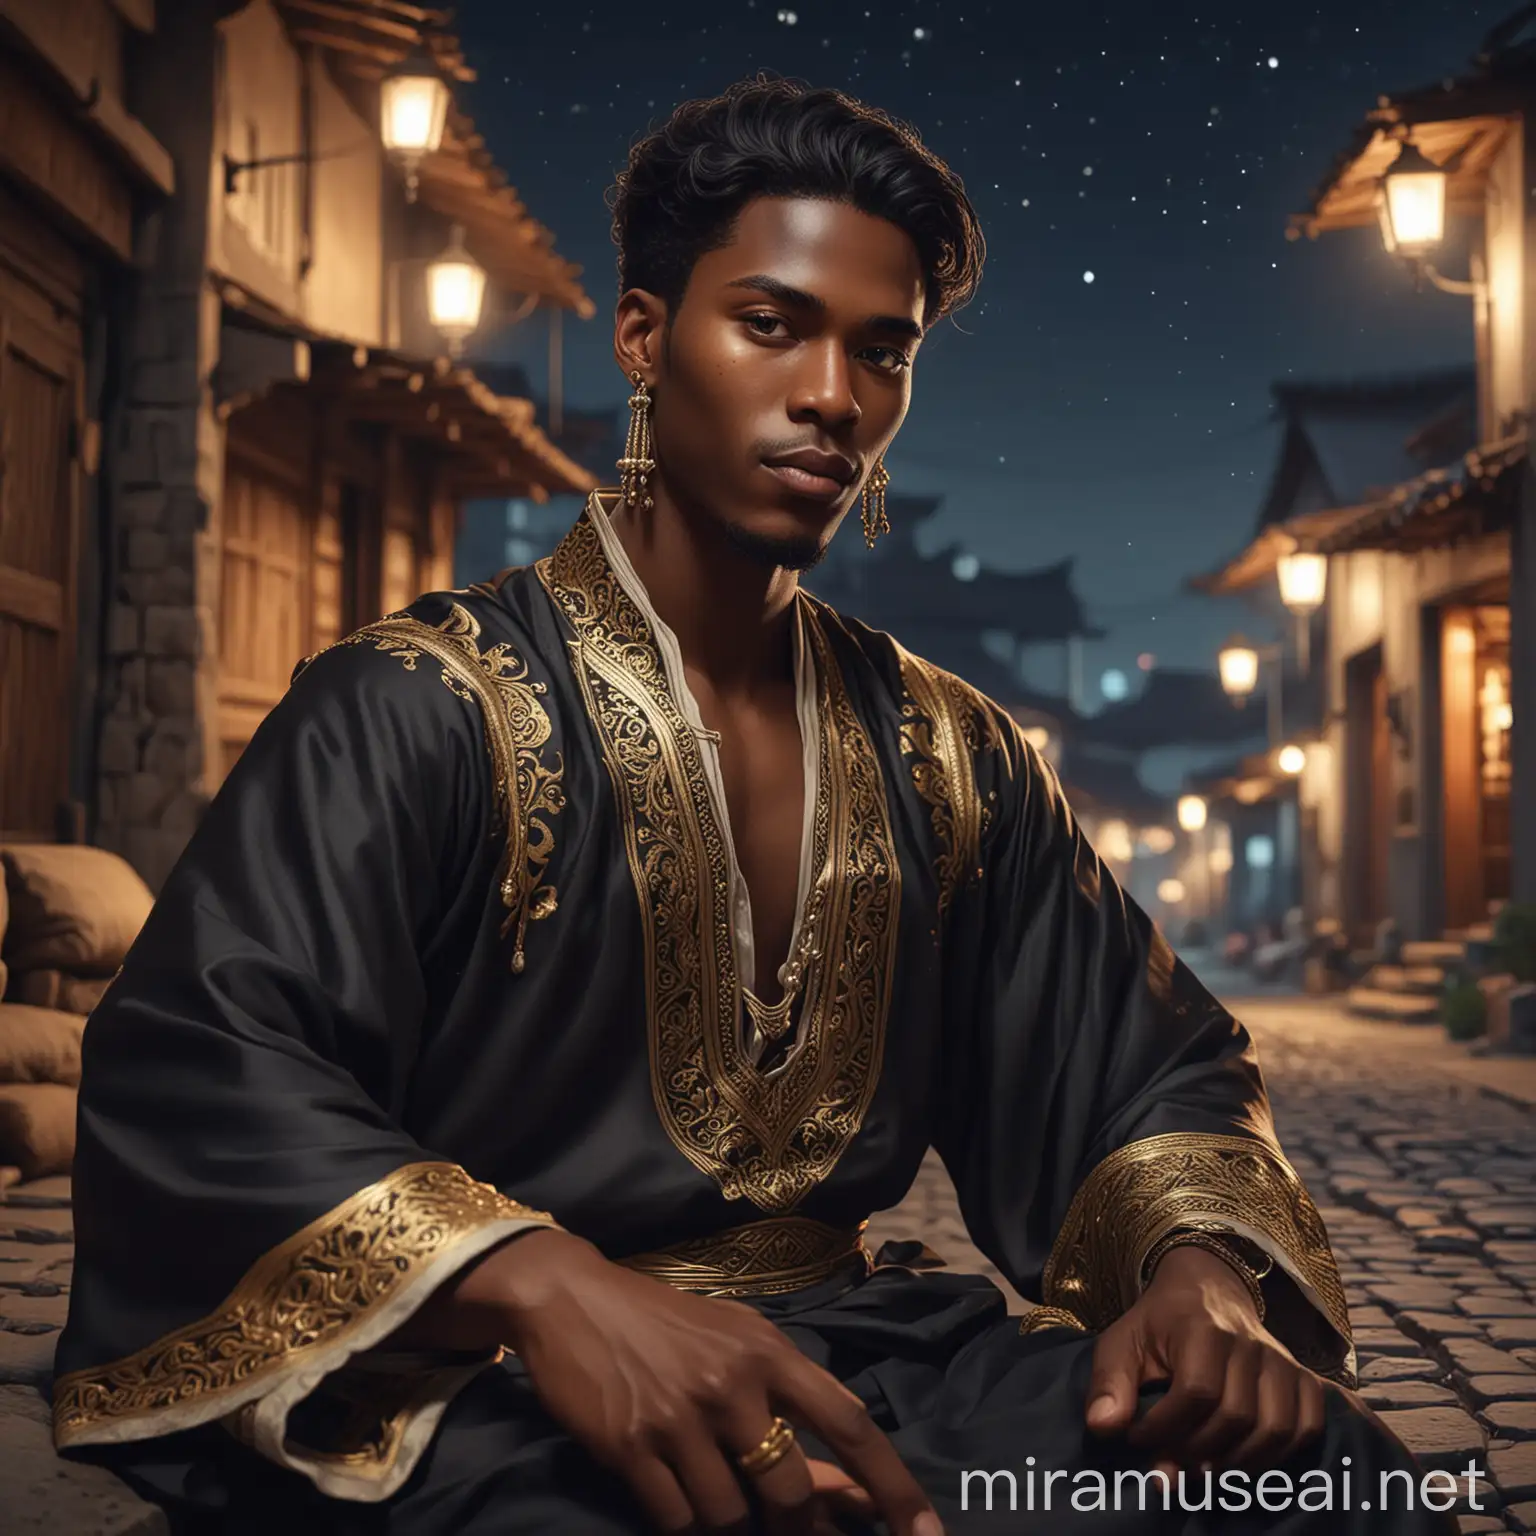 Handsome Prince in Royal Traditional Attire Laying on Village Street at Night